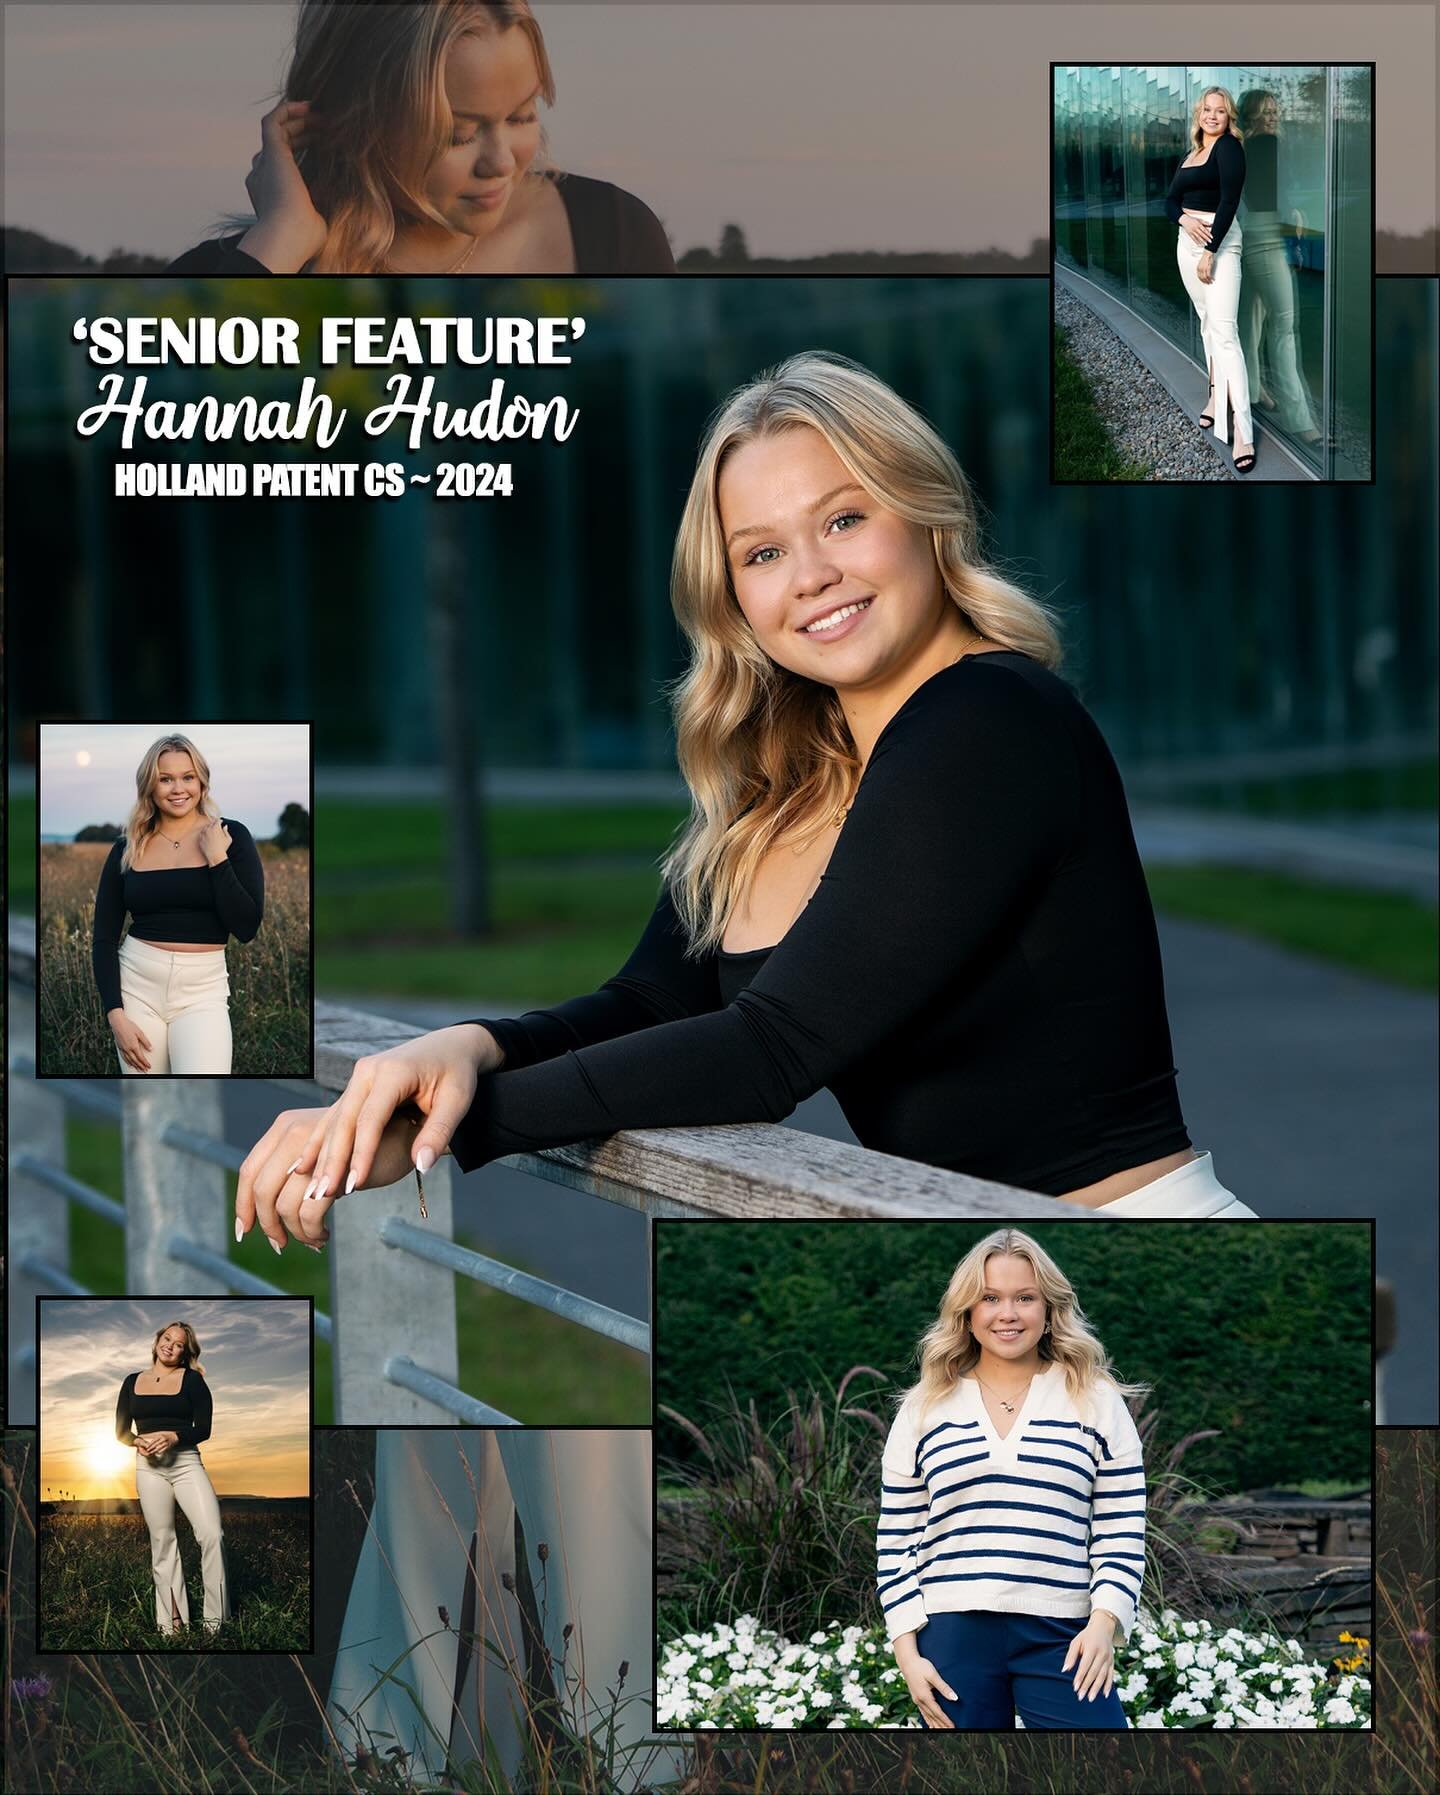 SENIOR FEATURE! Hannah Hudon 
Holland Patent HS 
#Classof2024
#ETPSeniorFeature 
@hannah_hudon 

Congratulations Hannah on your high school career, and all the best to you on your future endeavors! I&rsquo;m so glad we met and grateful for the opport